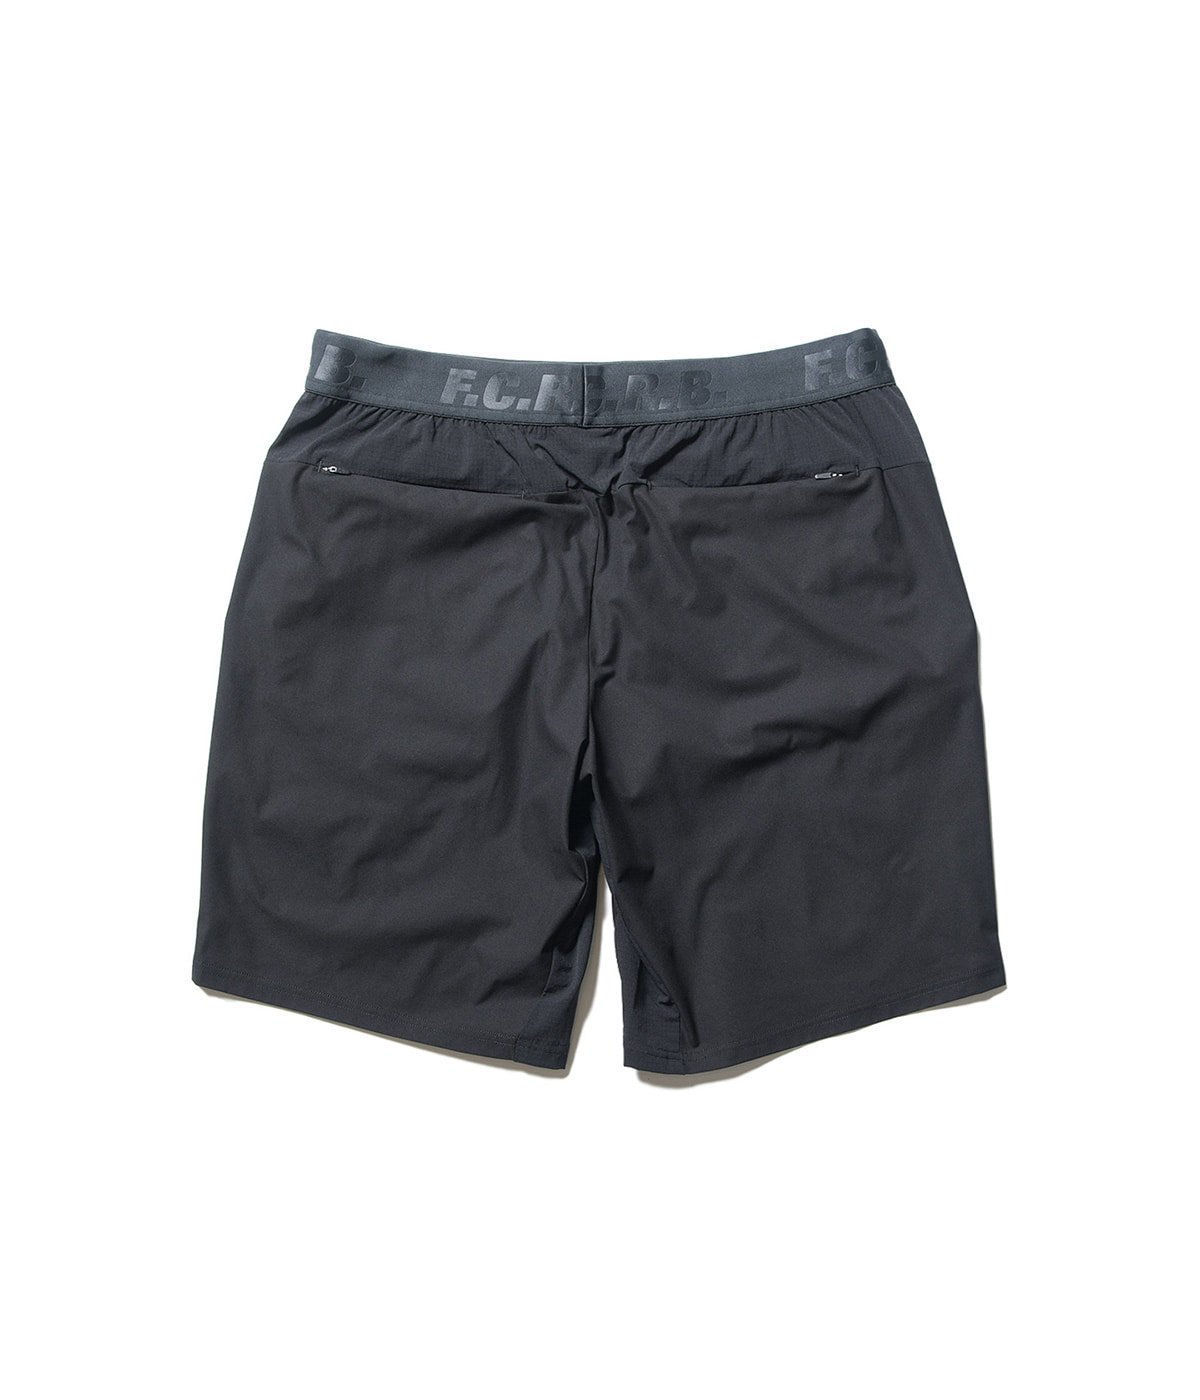 STRETCH LIGHT WEIGHT EASY SHORTS S グレー